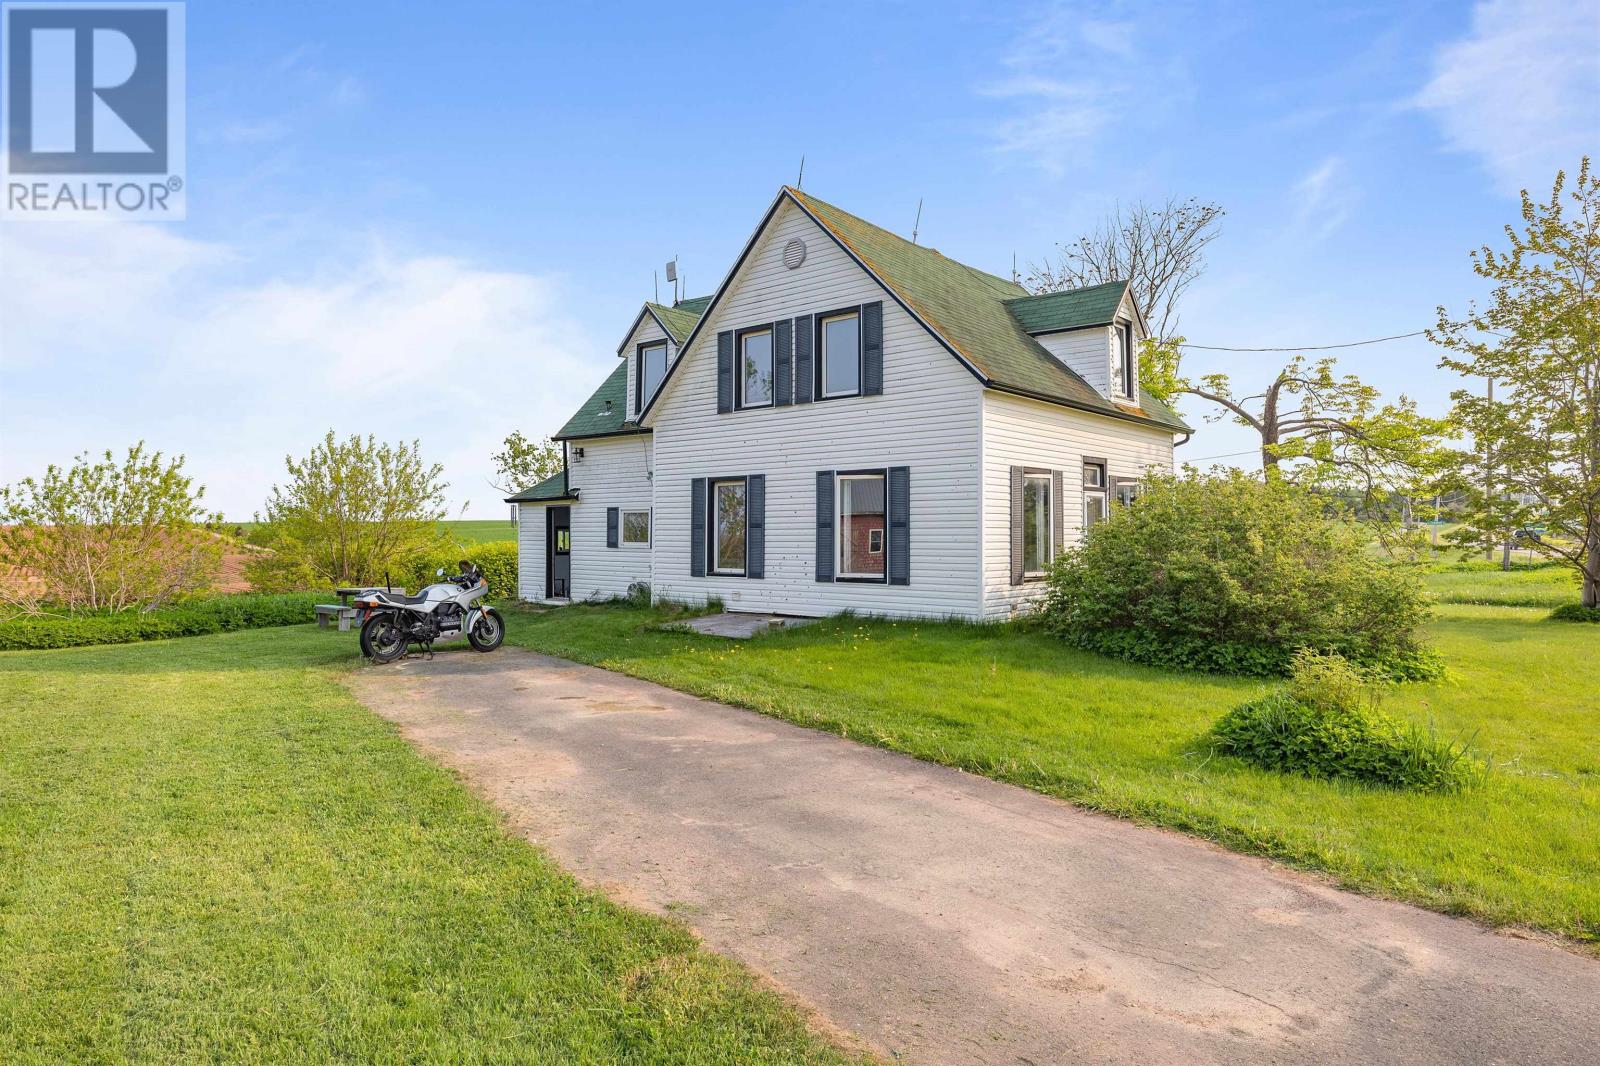 2202 East Point Road2202 East Point Road, Souris, Prince Edward Island C0A2B0, 4 Bedrooms Bedrooms, ,1 BathroomBathrooms,Single Family,For Sale,2202 East Point Road,202312312